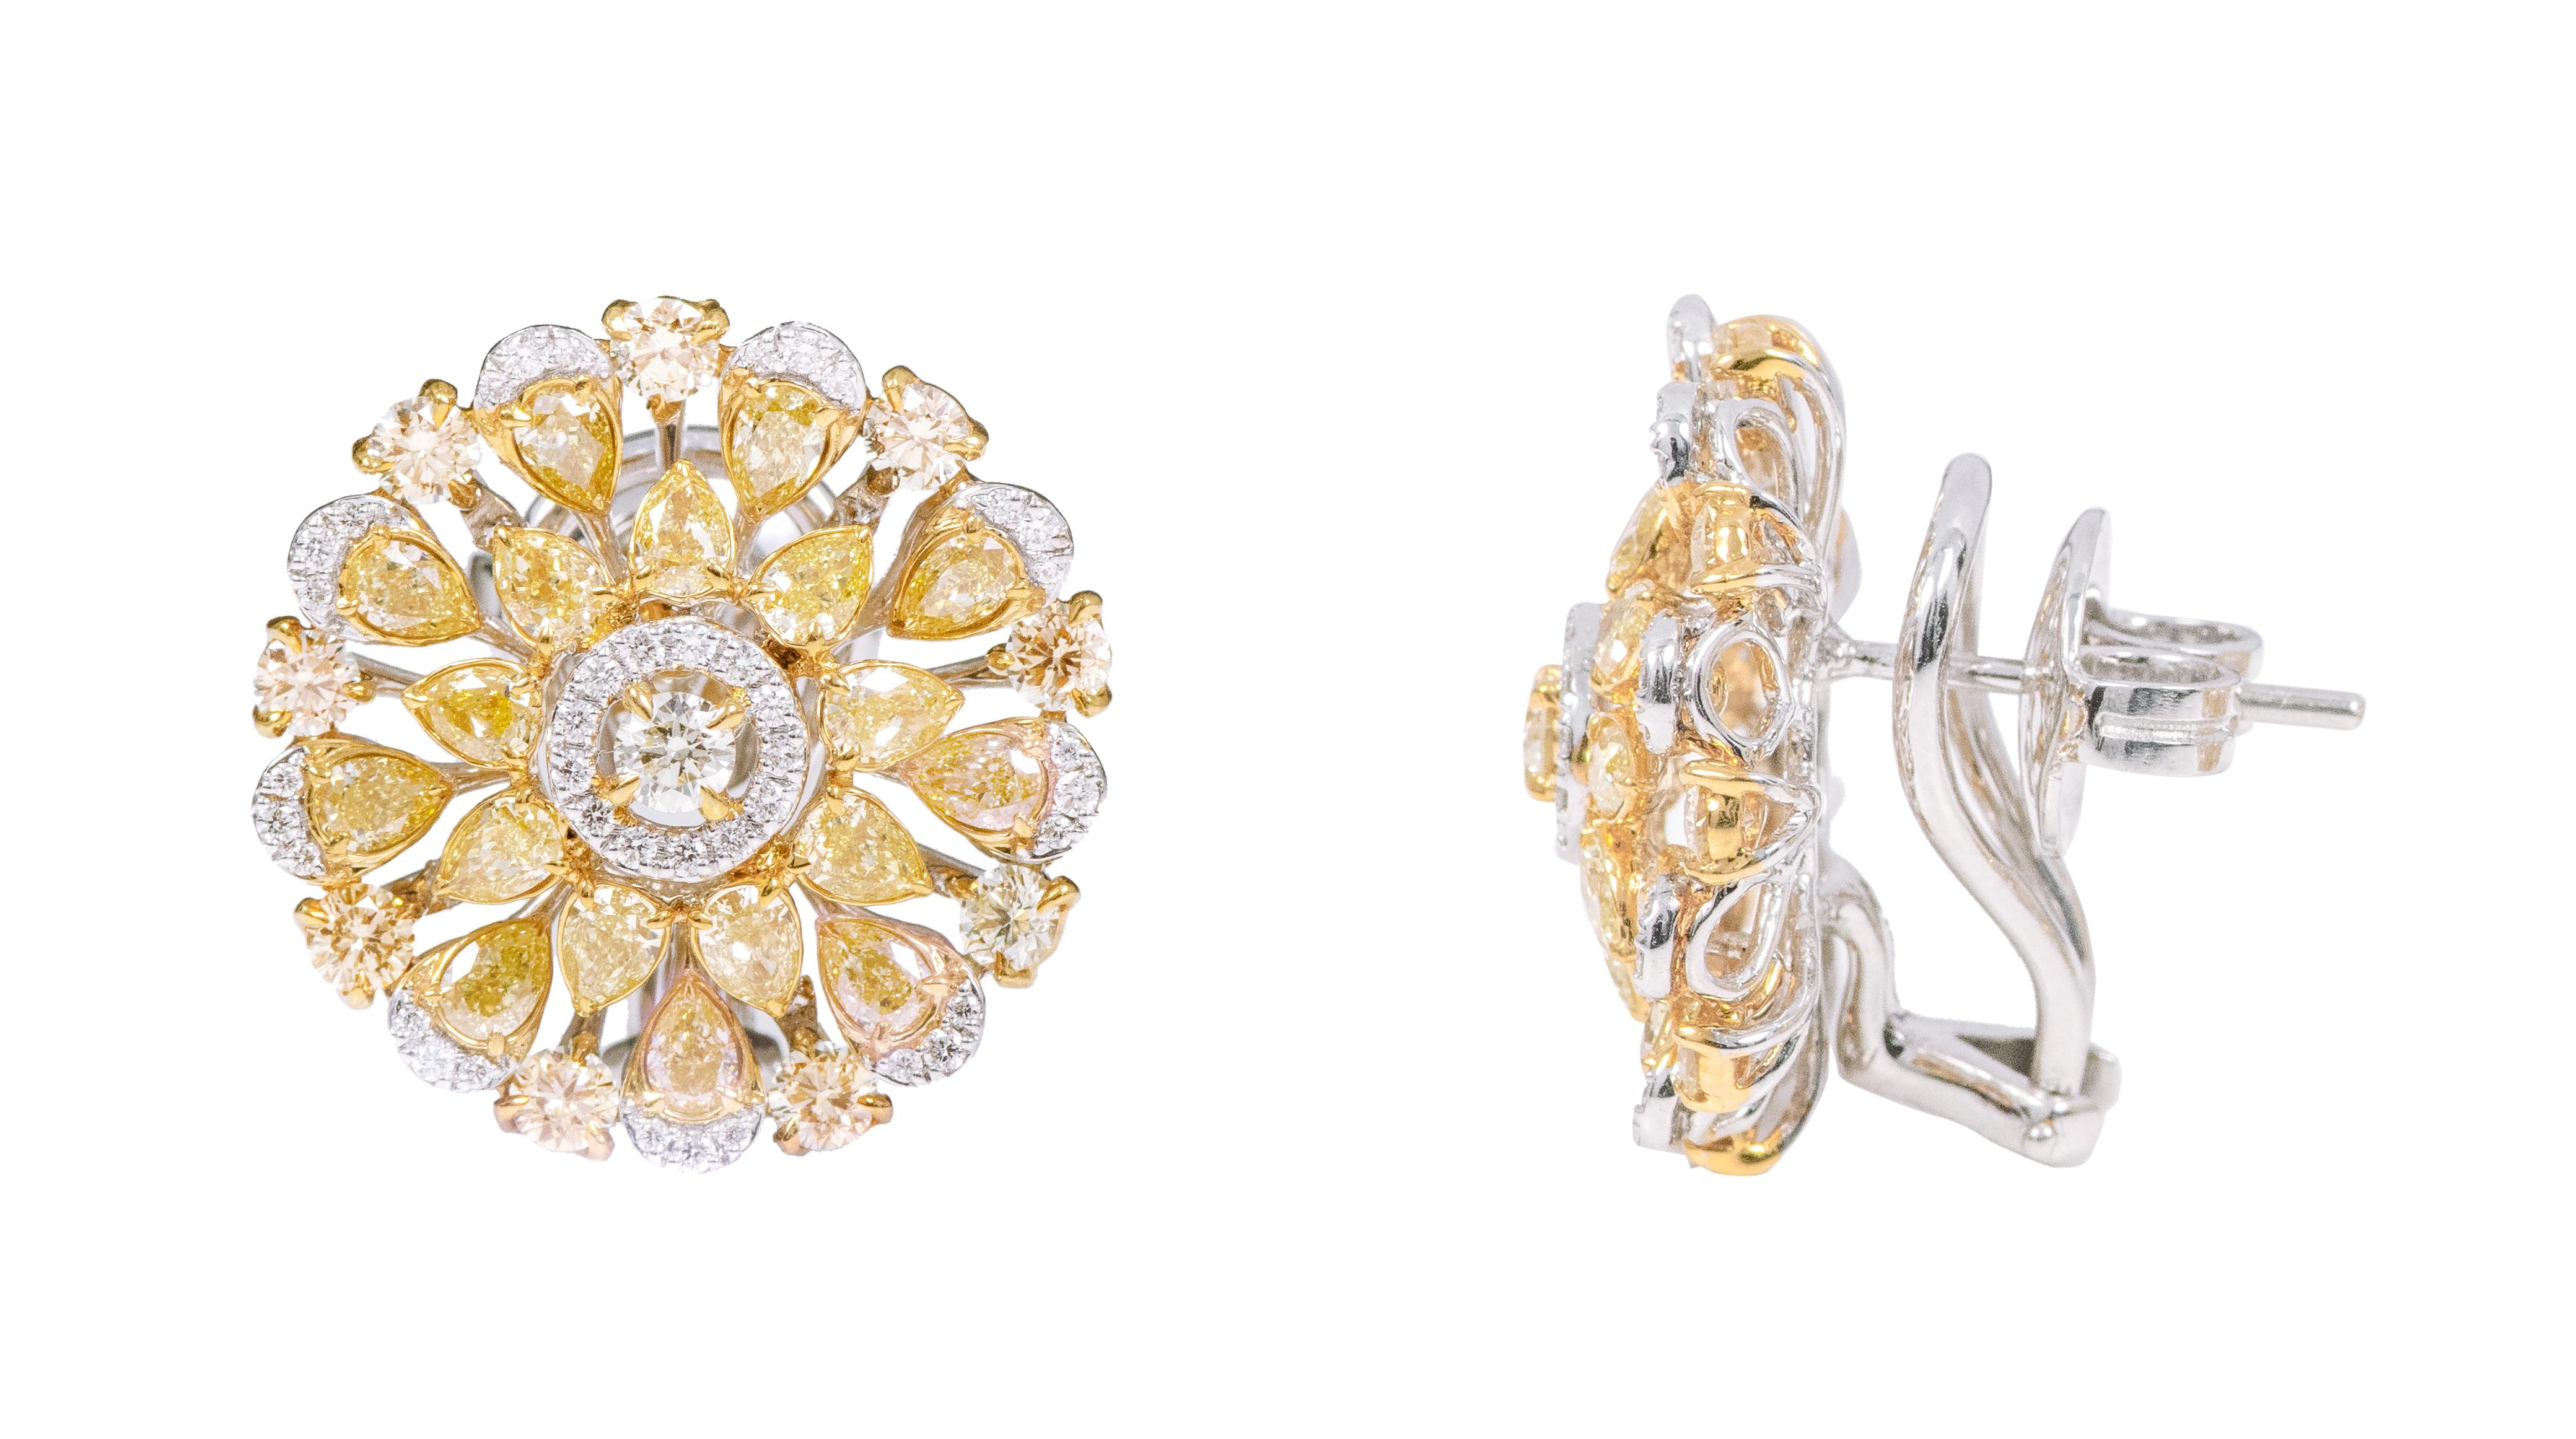 Contemporary 18 Karat Gold 5.69 Carat Fancy Yellow and White Diamond Solitaire Stud Earrings For Sale